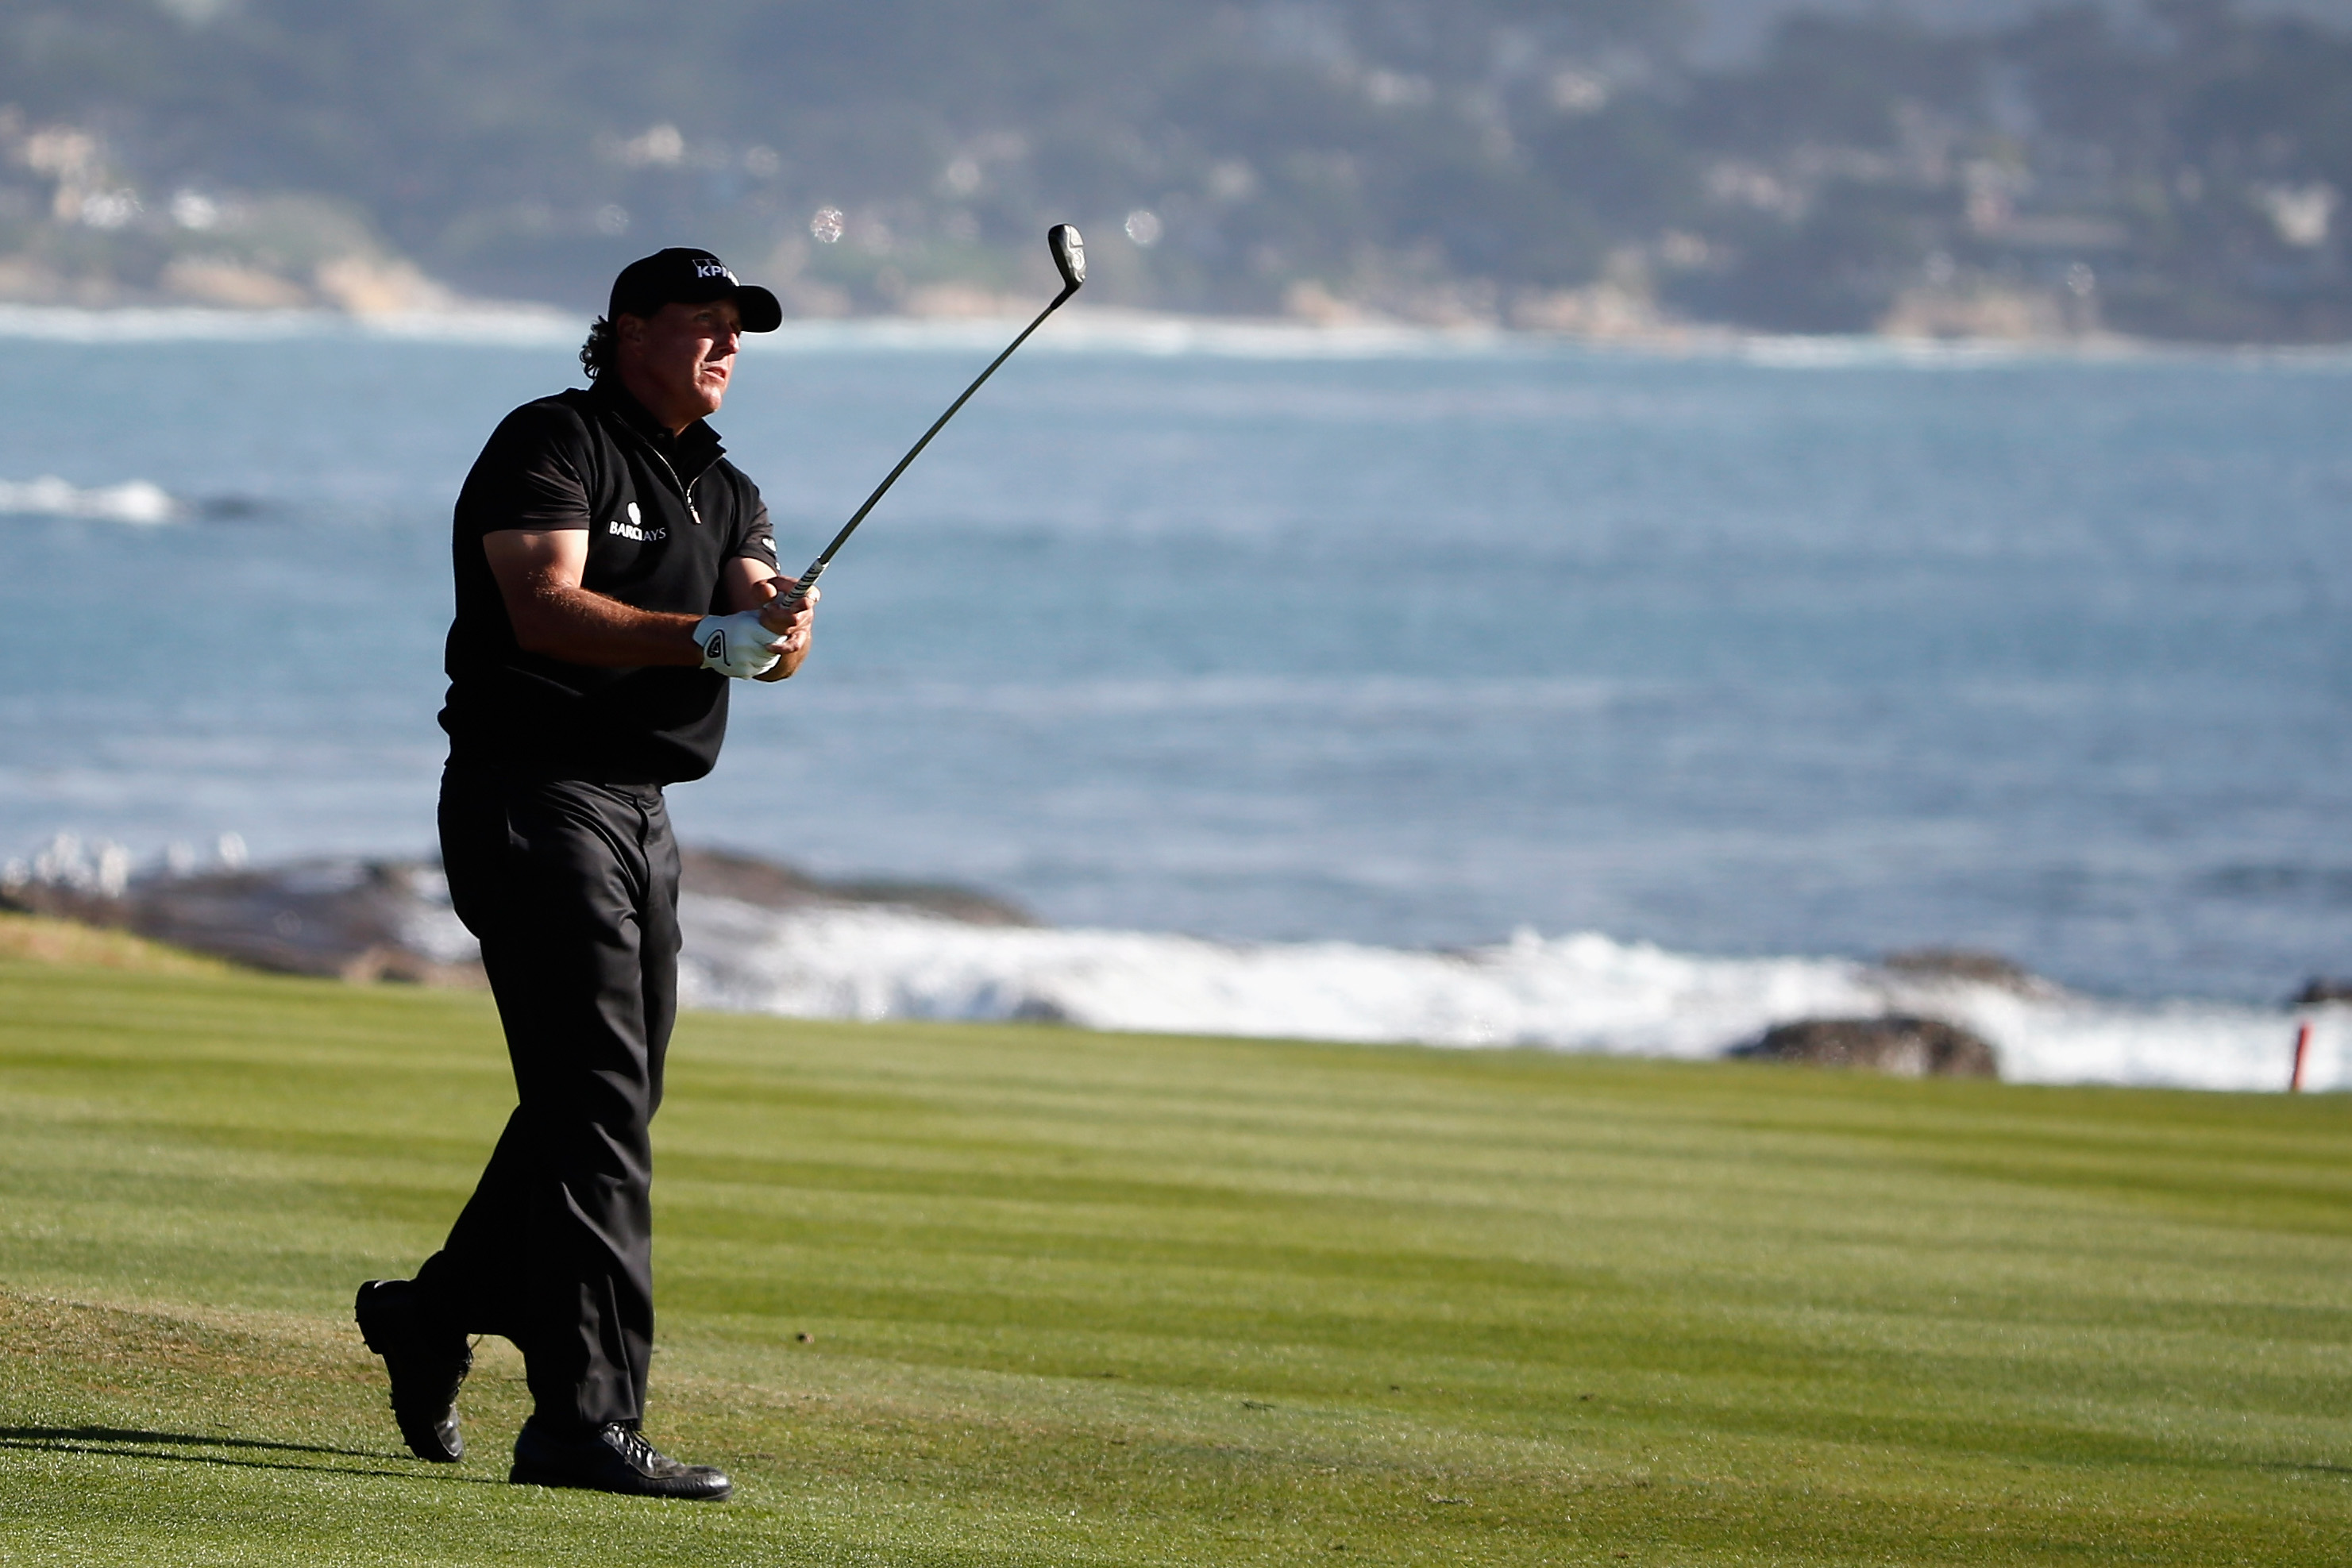 Your Preview for the 2018 ATandT Pebble Beach Pro-Am